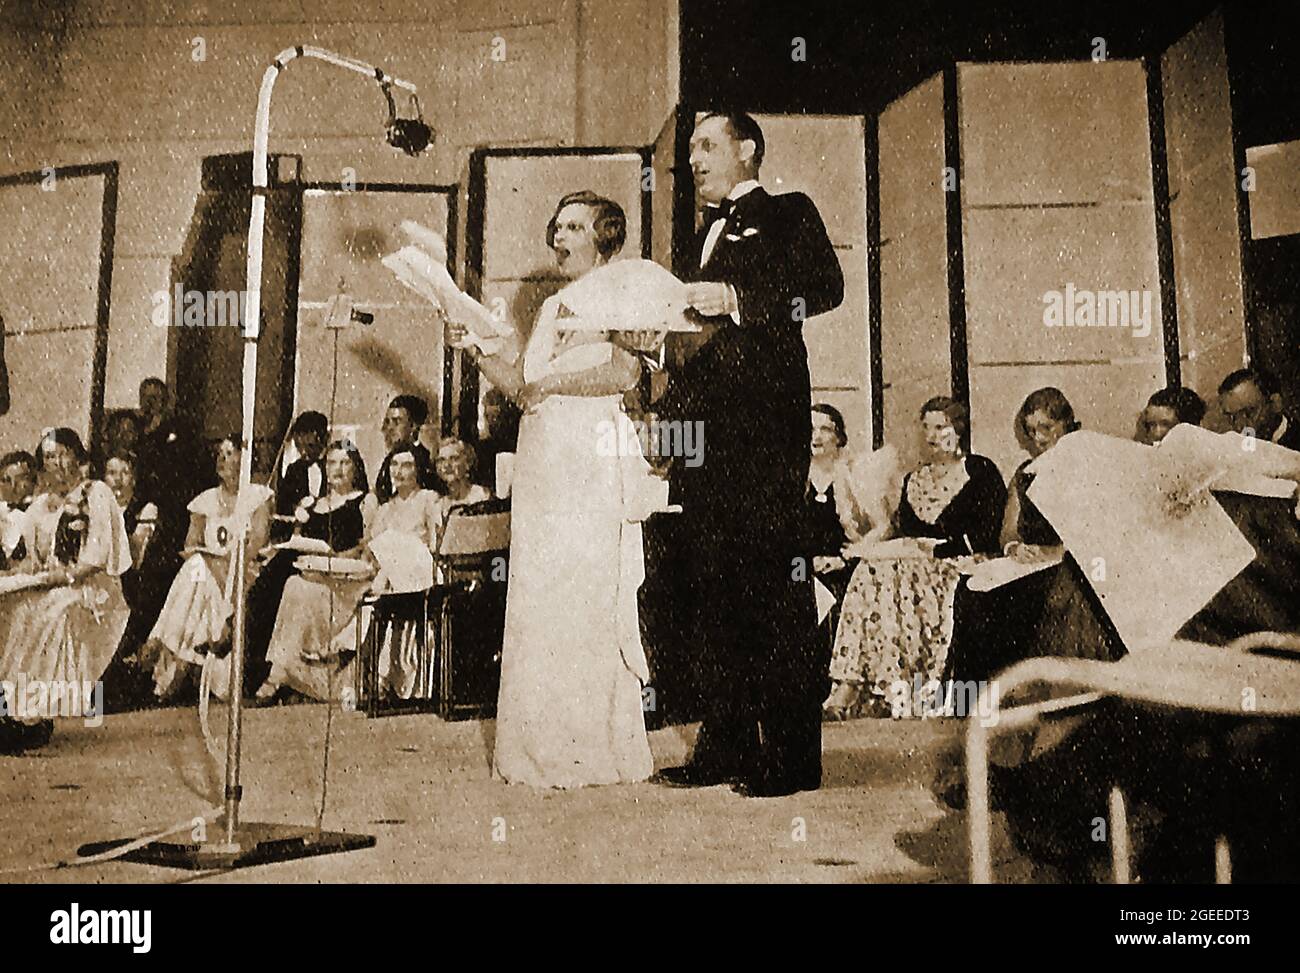 Circa 1947 - An operetta being performed in a the original BBC  (British Broadcasting Company / Corporation)   studios. London, UK.1927 saw the establishment of British Broadcasting Corporation  by Royal Charter with  Reith as its first Director-General.  John Logie Baird began experimenting  with television broadcasts on BBC frequencies in November 1929. Stock Photo